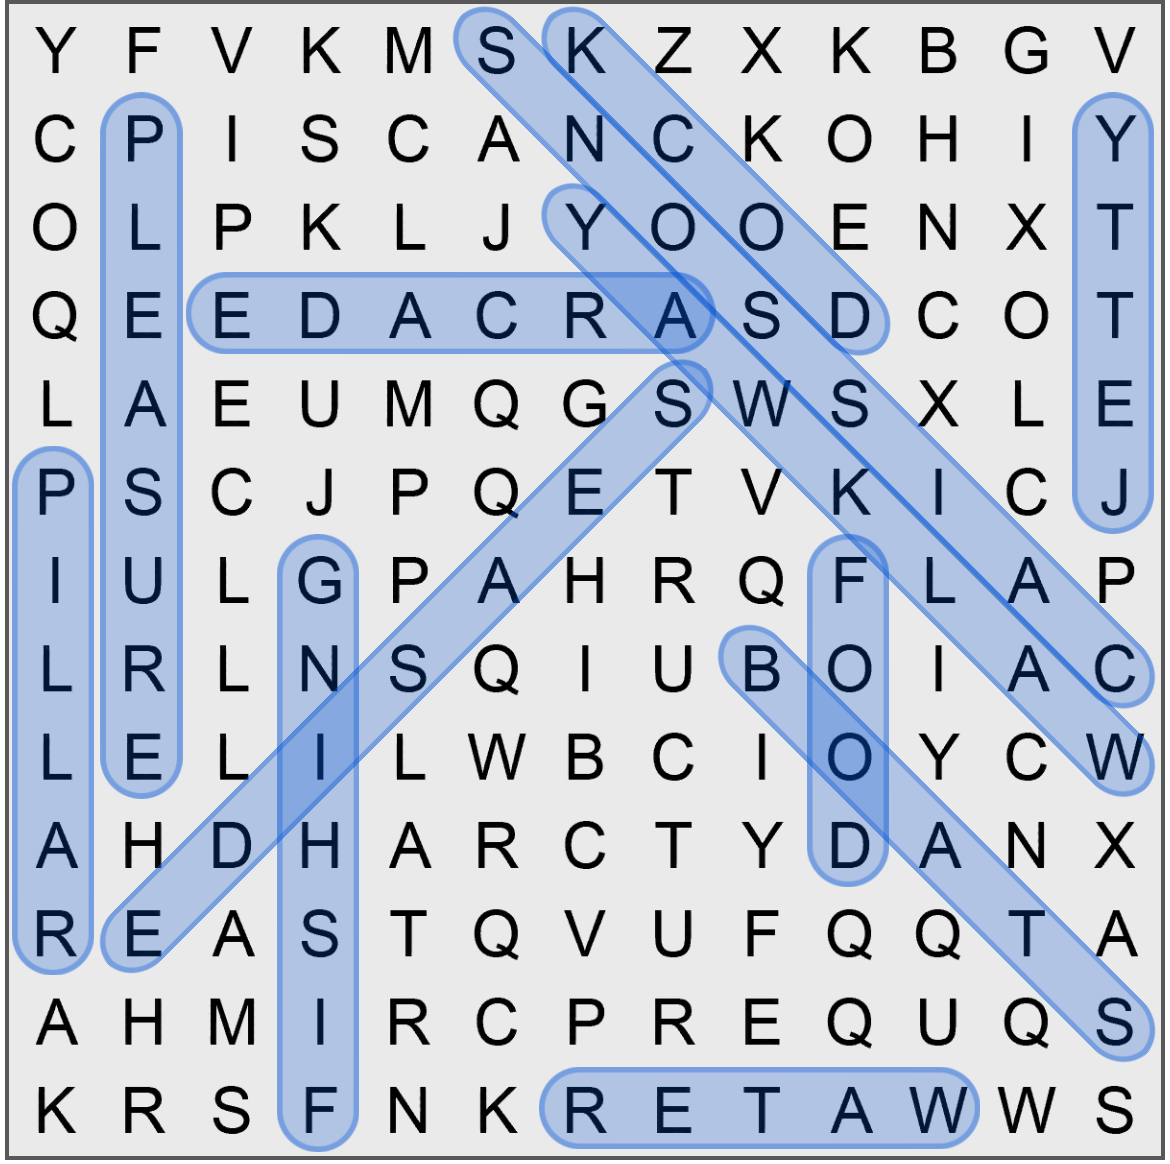 Puzzle Page Word Search November 24 2019 Answers PuzzlePageAnswers net